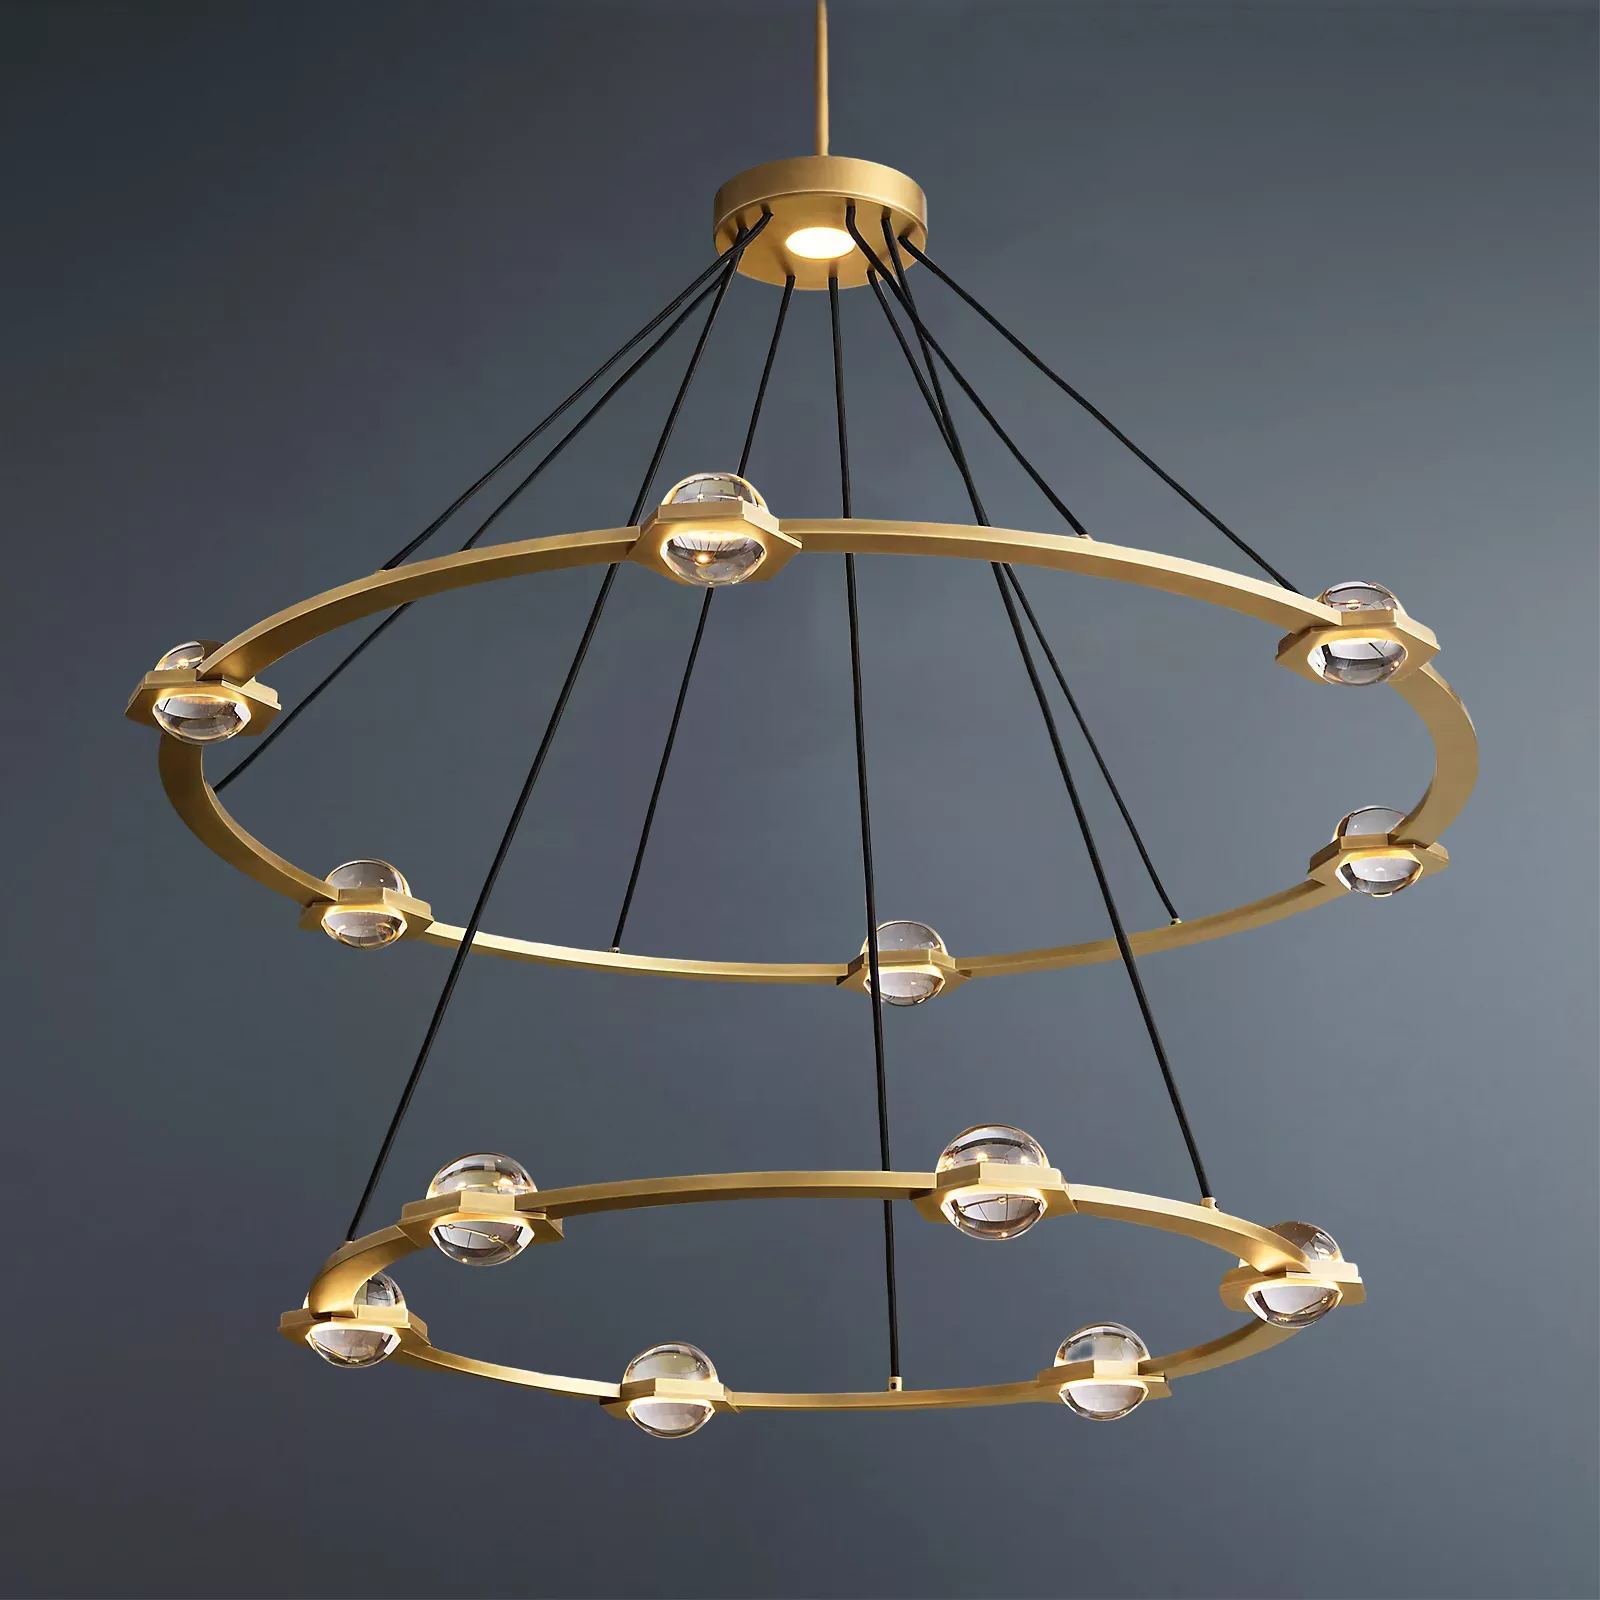 Éclatant Vintage Two-tier Round Chandelier 48"-alimialighting